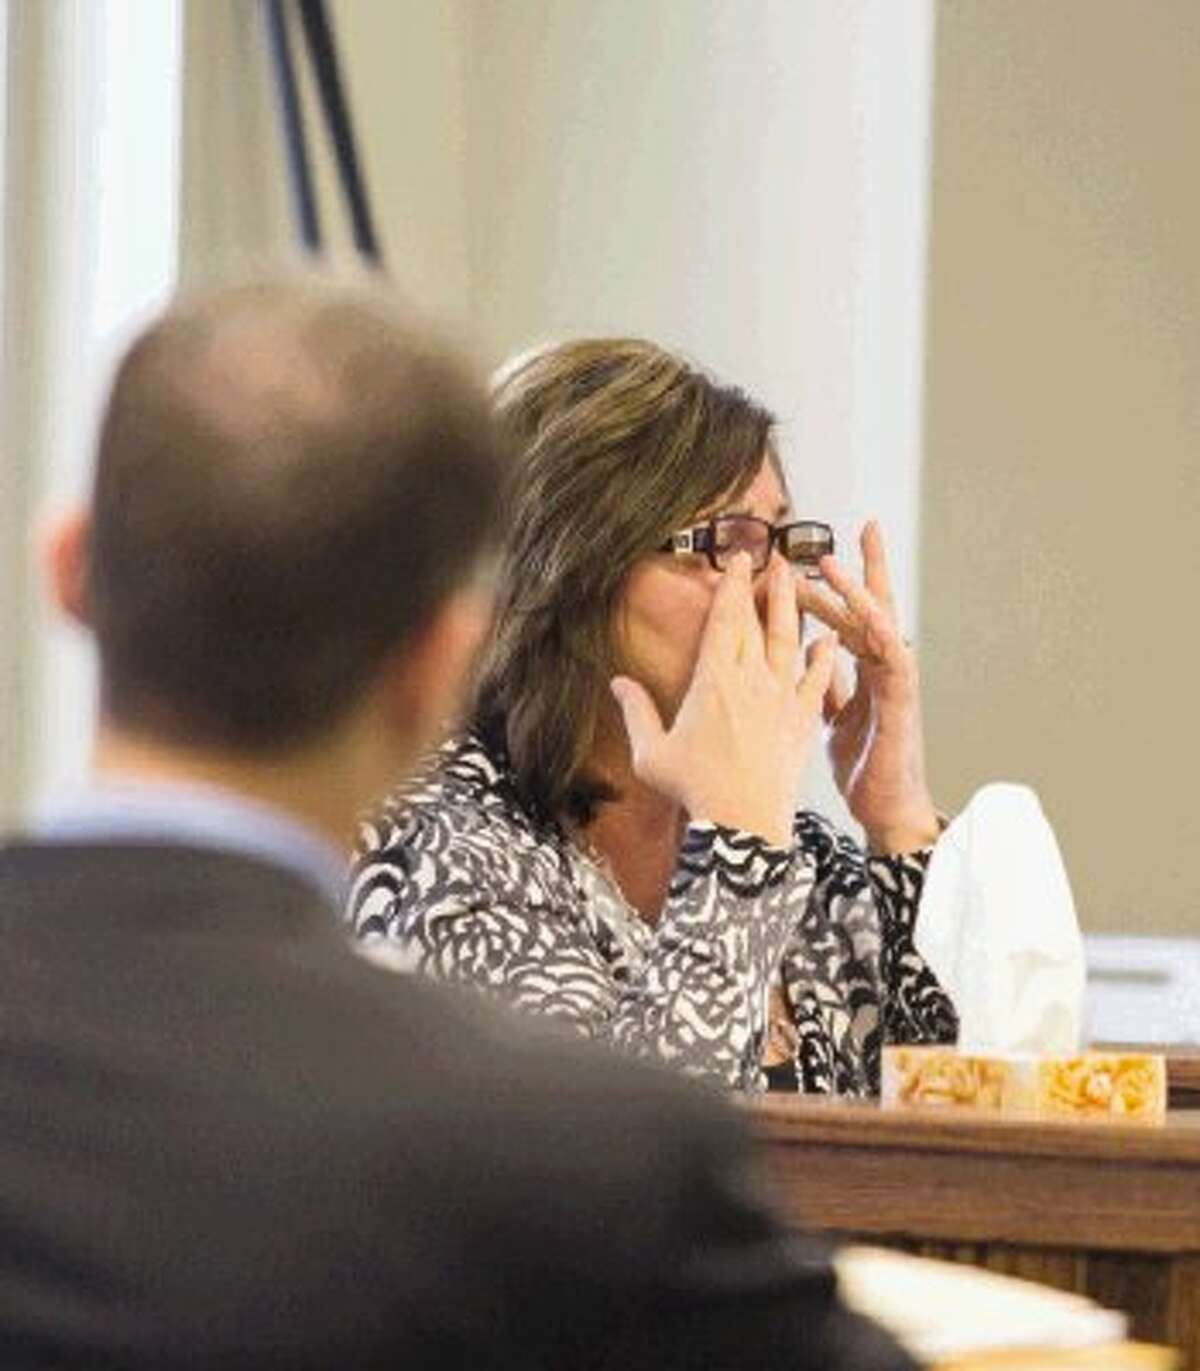 Laura Thomason, one of the first to see Robert Middleton after he was set on fire, wipes tears from her eyes during a hearing petition at the 359th Judicial District Court with Judge Kathleen Hamilton presiding in Conroe Monday. Don Willburn Collins is accused of murdering Middleton by setting him on fire in 1998.